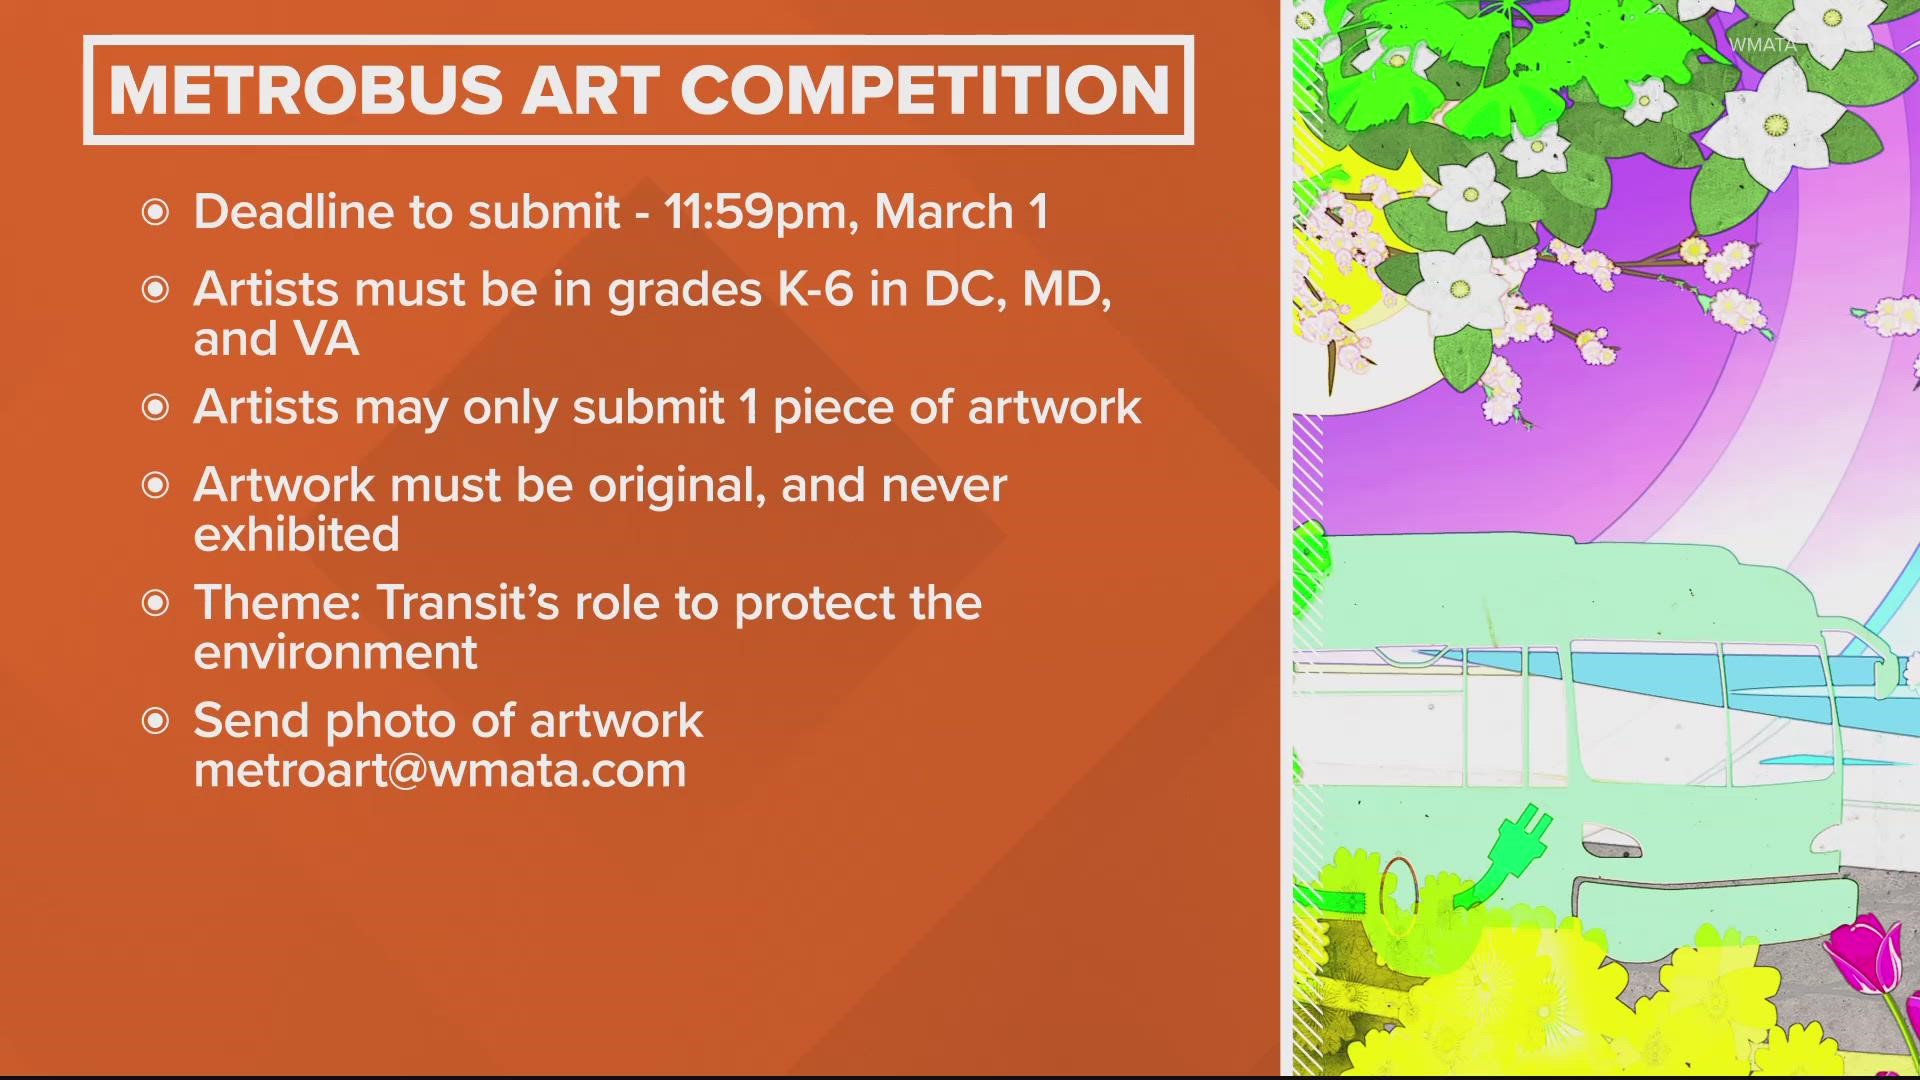 The winner entries will be painted on a Metro bus to celebrate Earth Day